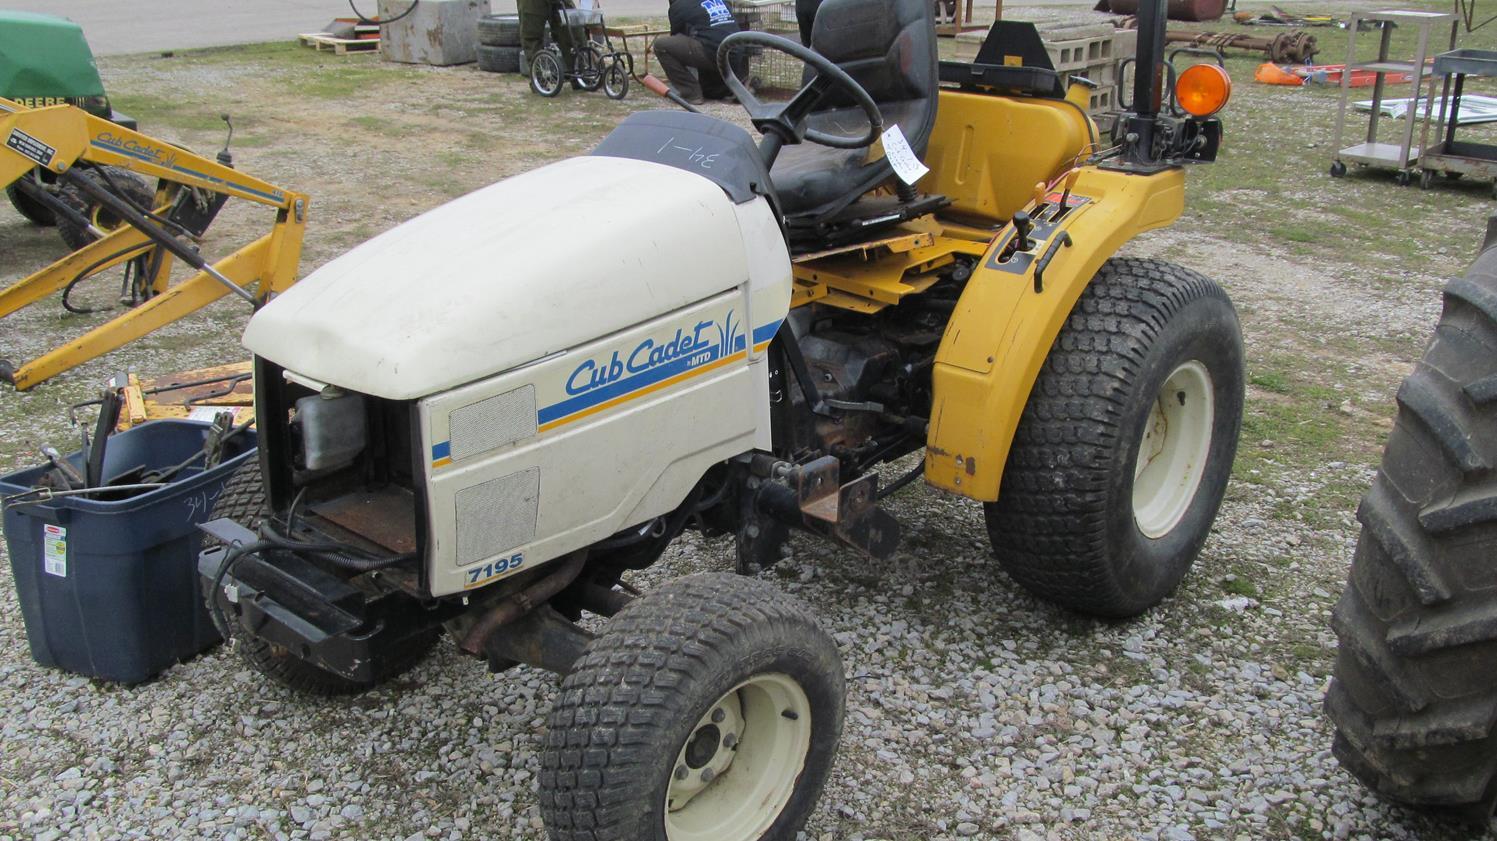 34-1 - CUB CADET 7195 DIESEL TRACTOR WITH BELLY MOWER AND FRONT